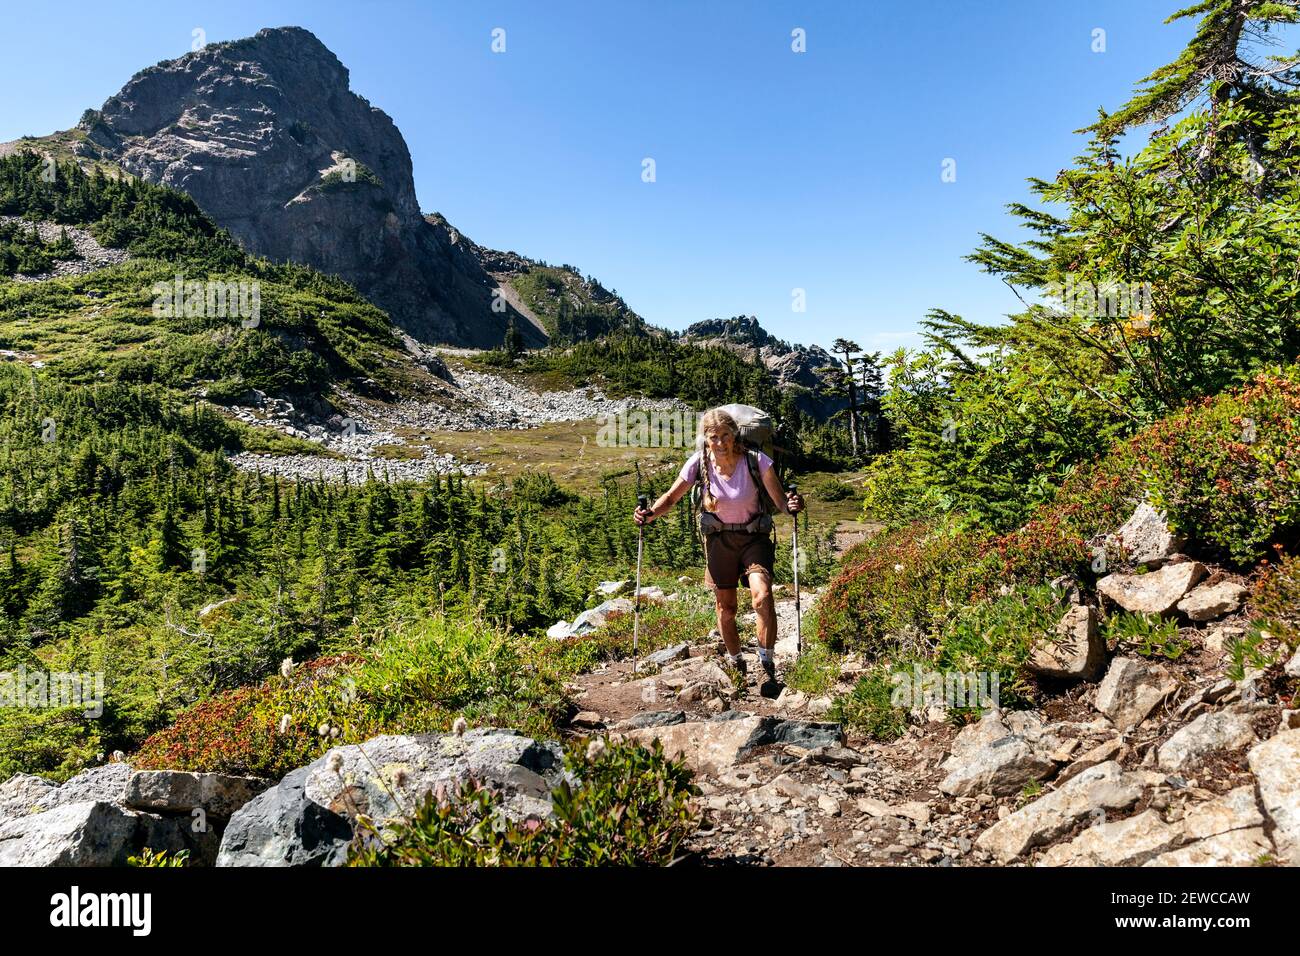 WA17641-00.....WASHINGTON - Woman backpacking on the Pacific Crest Trail north of Snoqualmie Pass along Chickmin Ridge.  MR# S1 Stock Photo